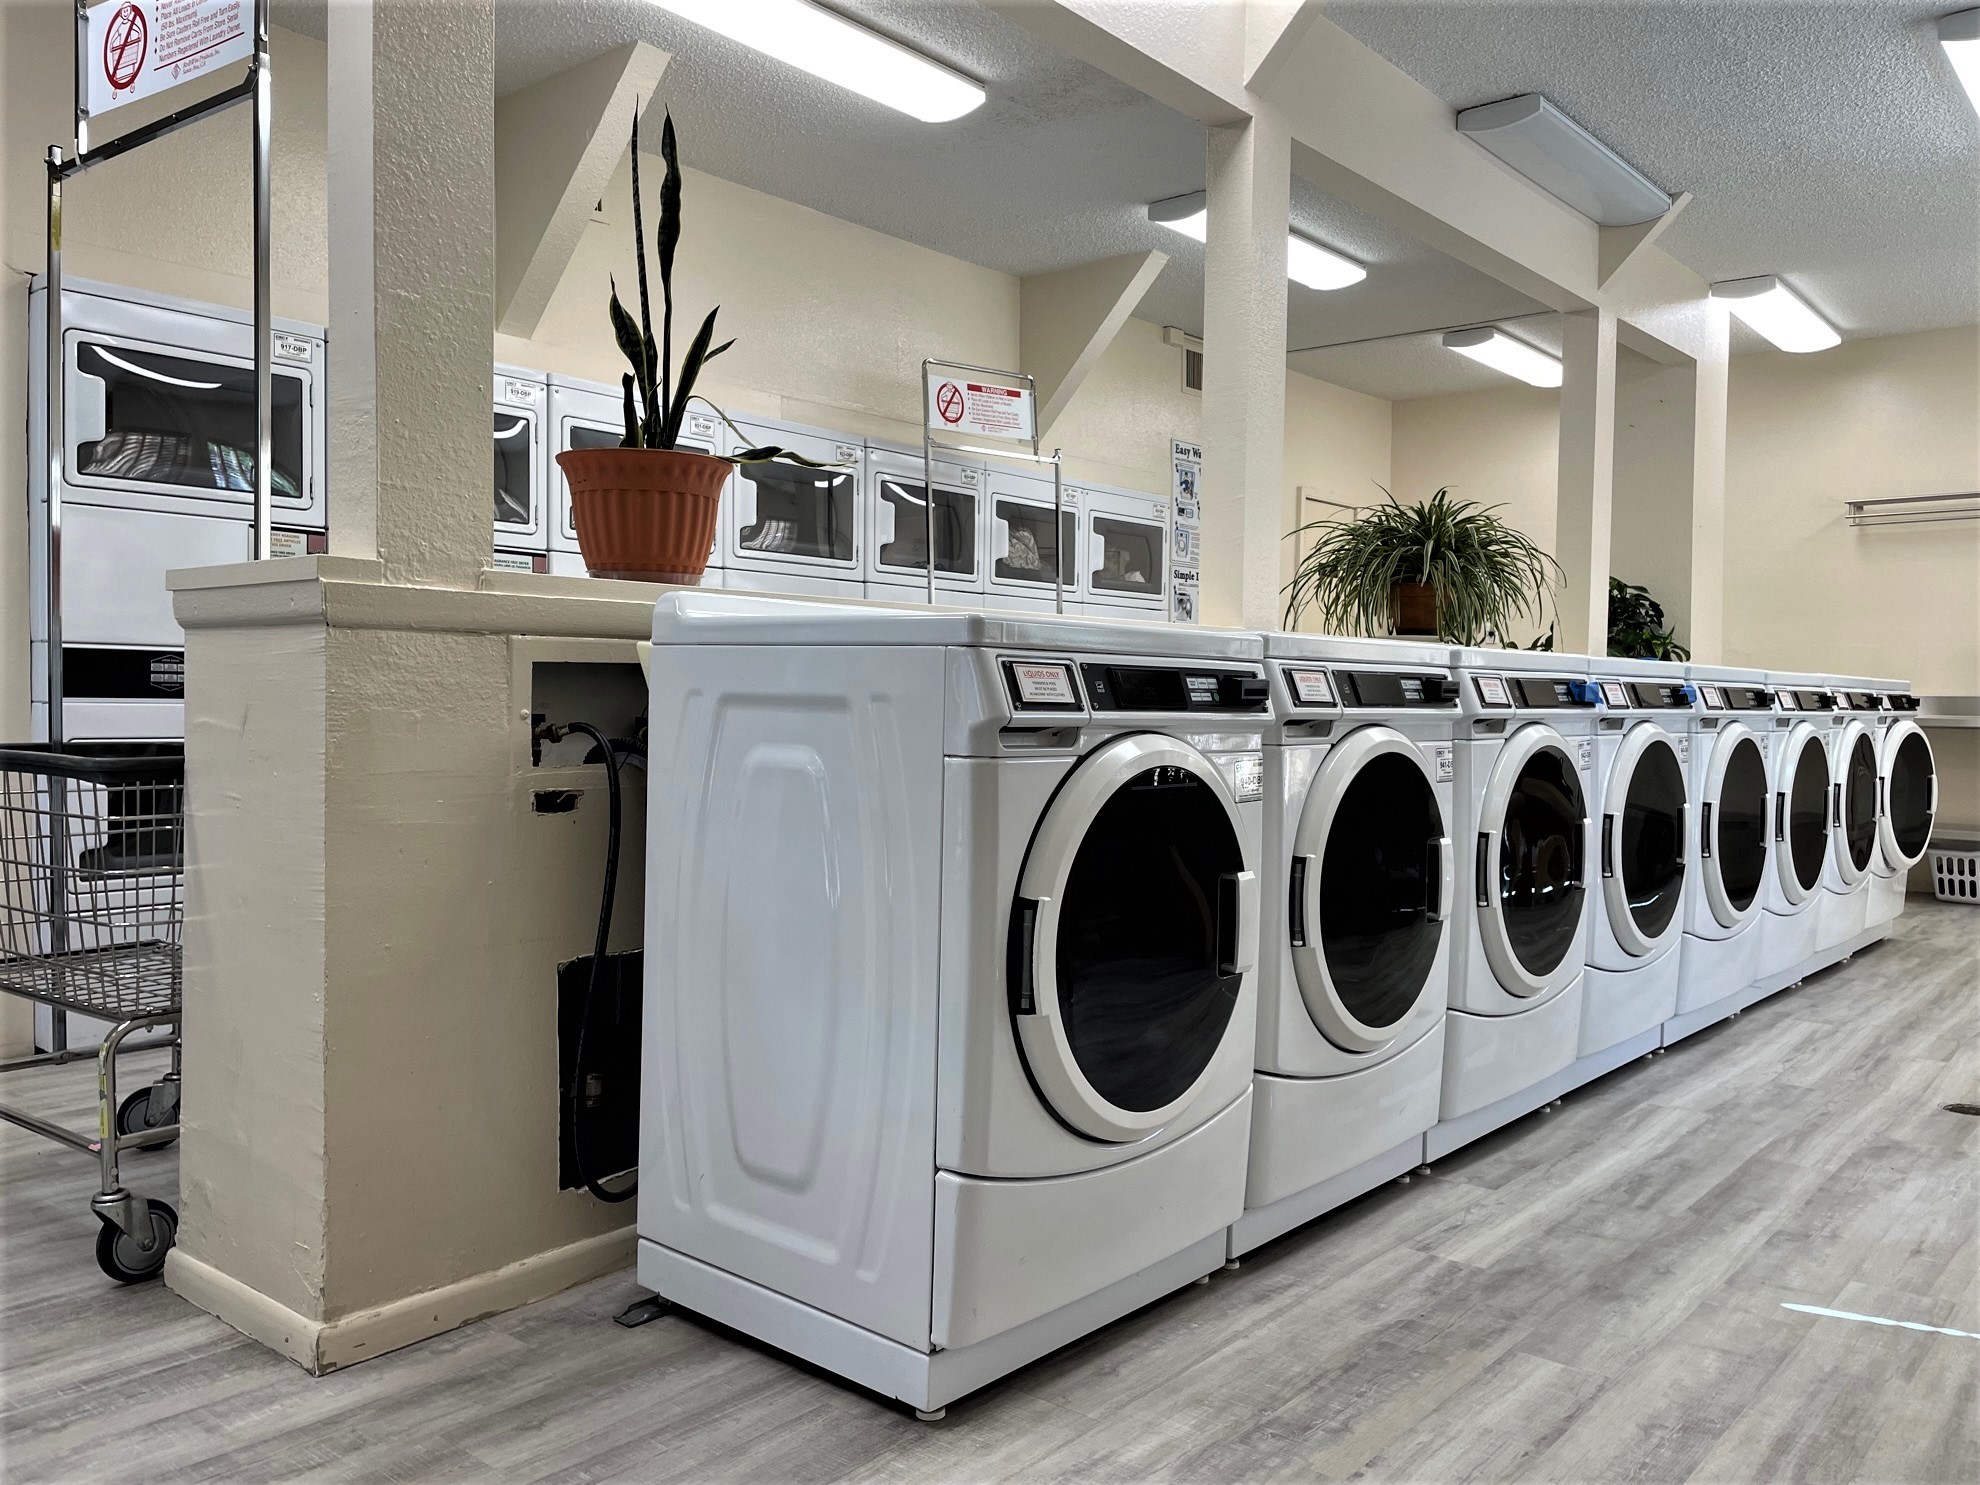 The Reserve Laundry Area